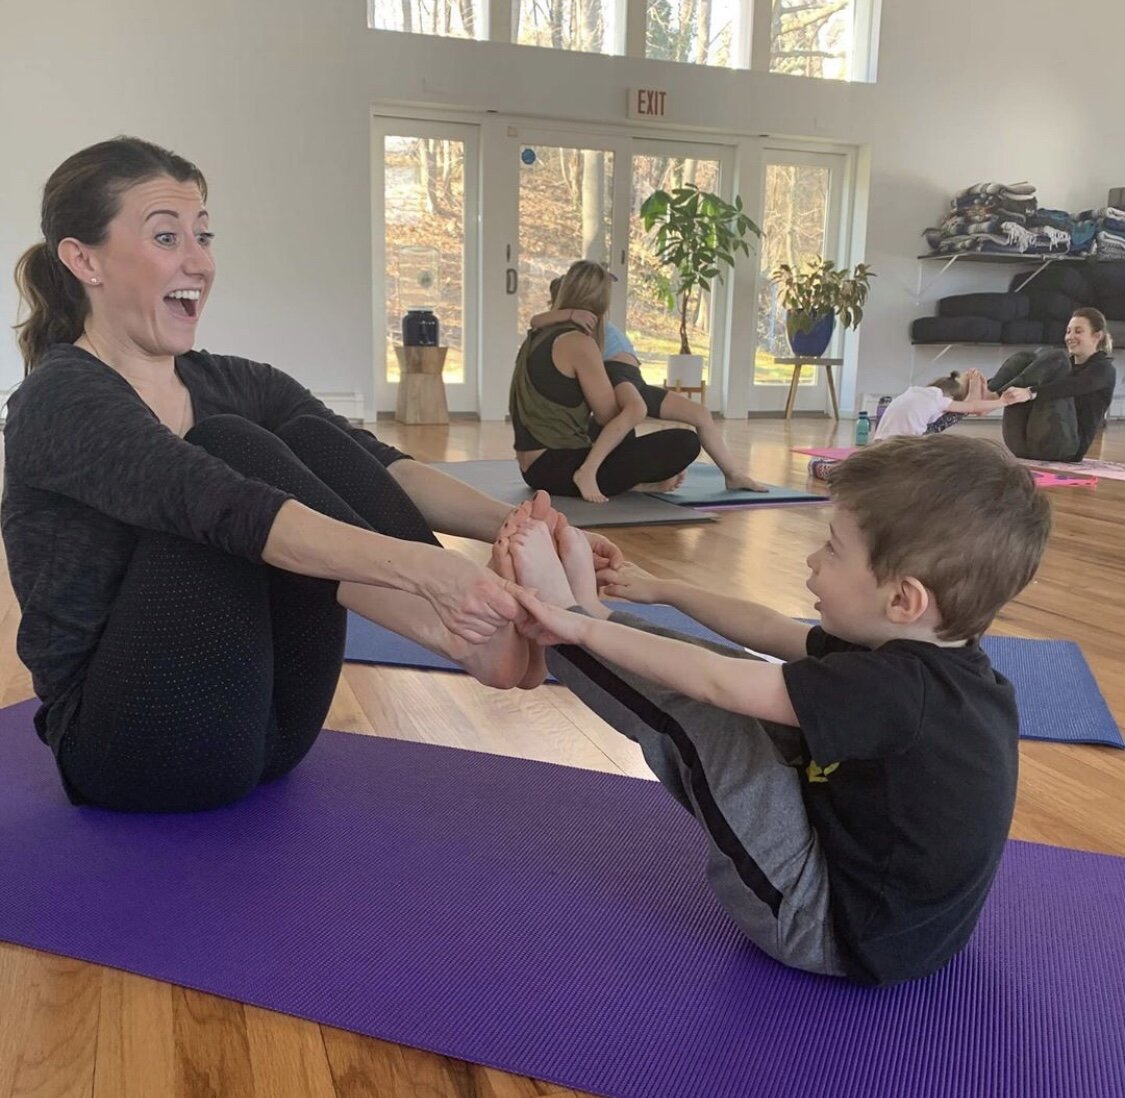 Kids and Family Yoga Classes - Villager Yoga Classes